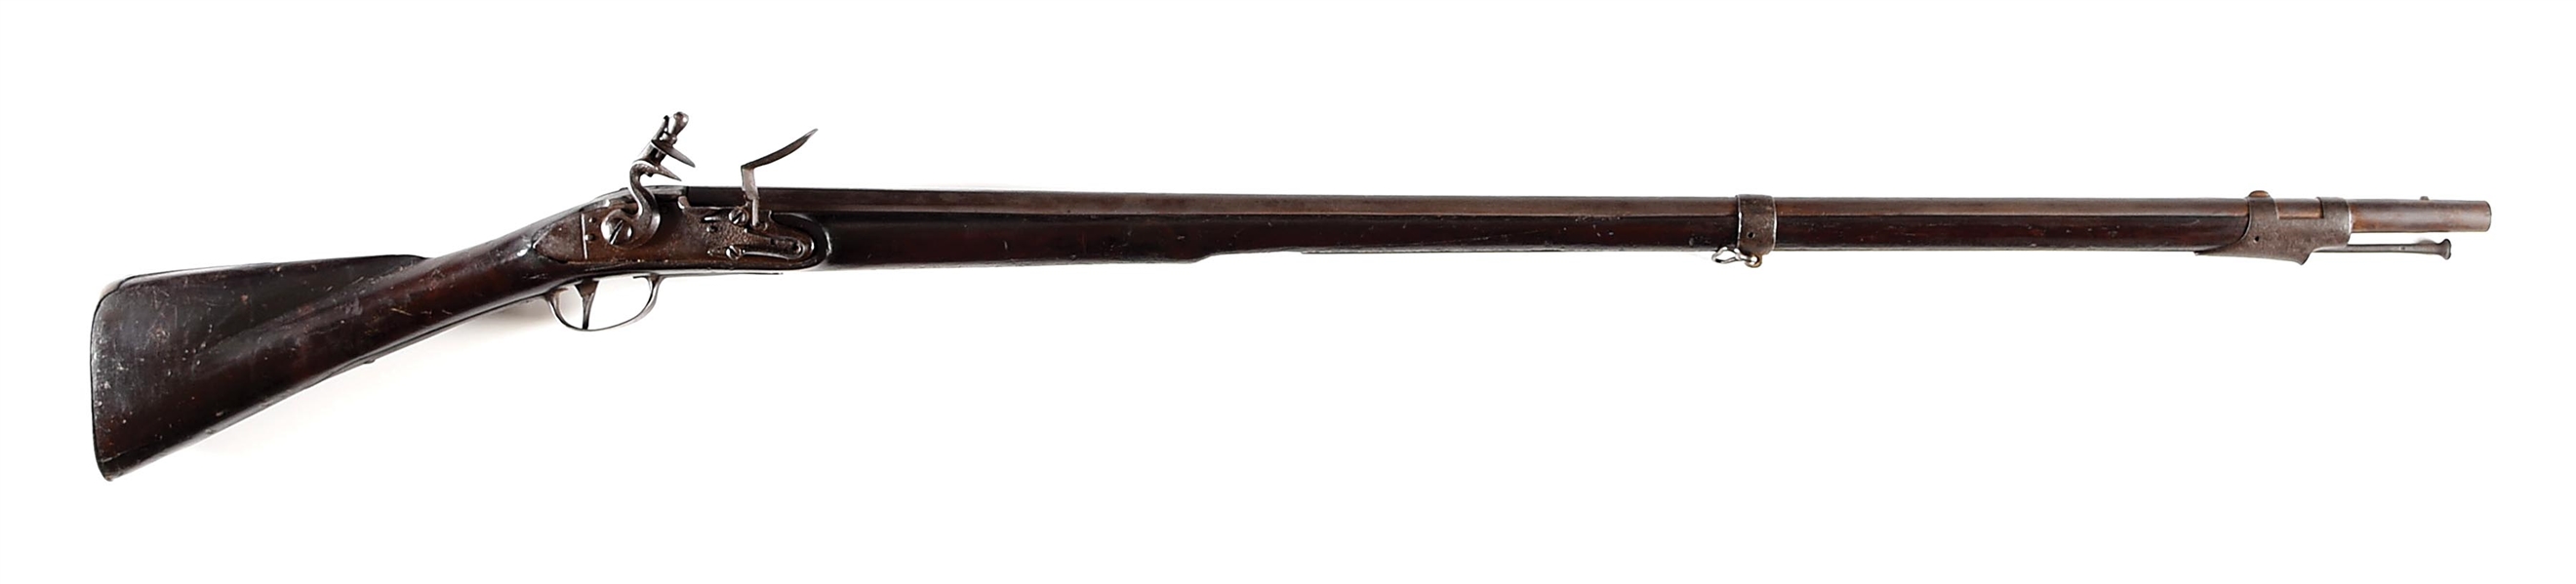 (A) REVOLUTIONARY WAR AMERICAN STOCKED FLINTLOCK MUSKET USING FRENCH 1728 COMPONENTS.